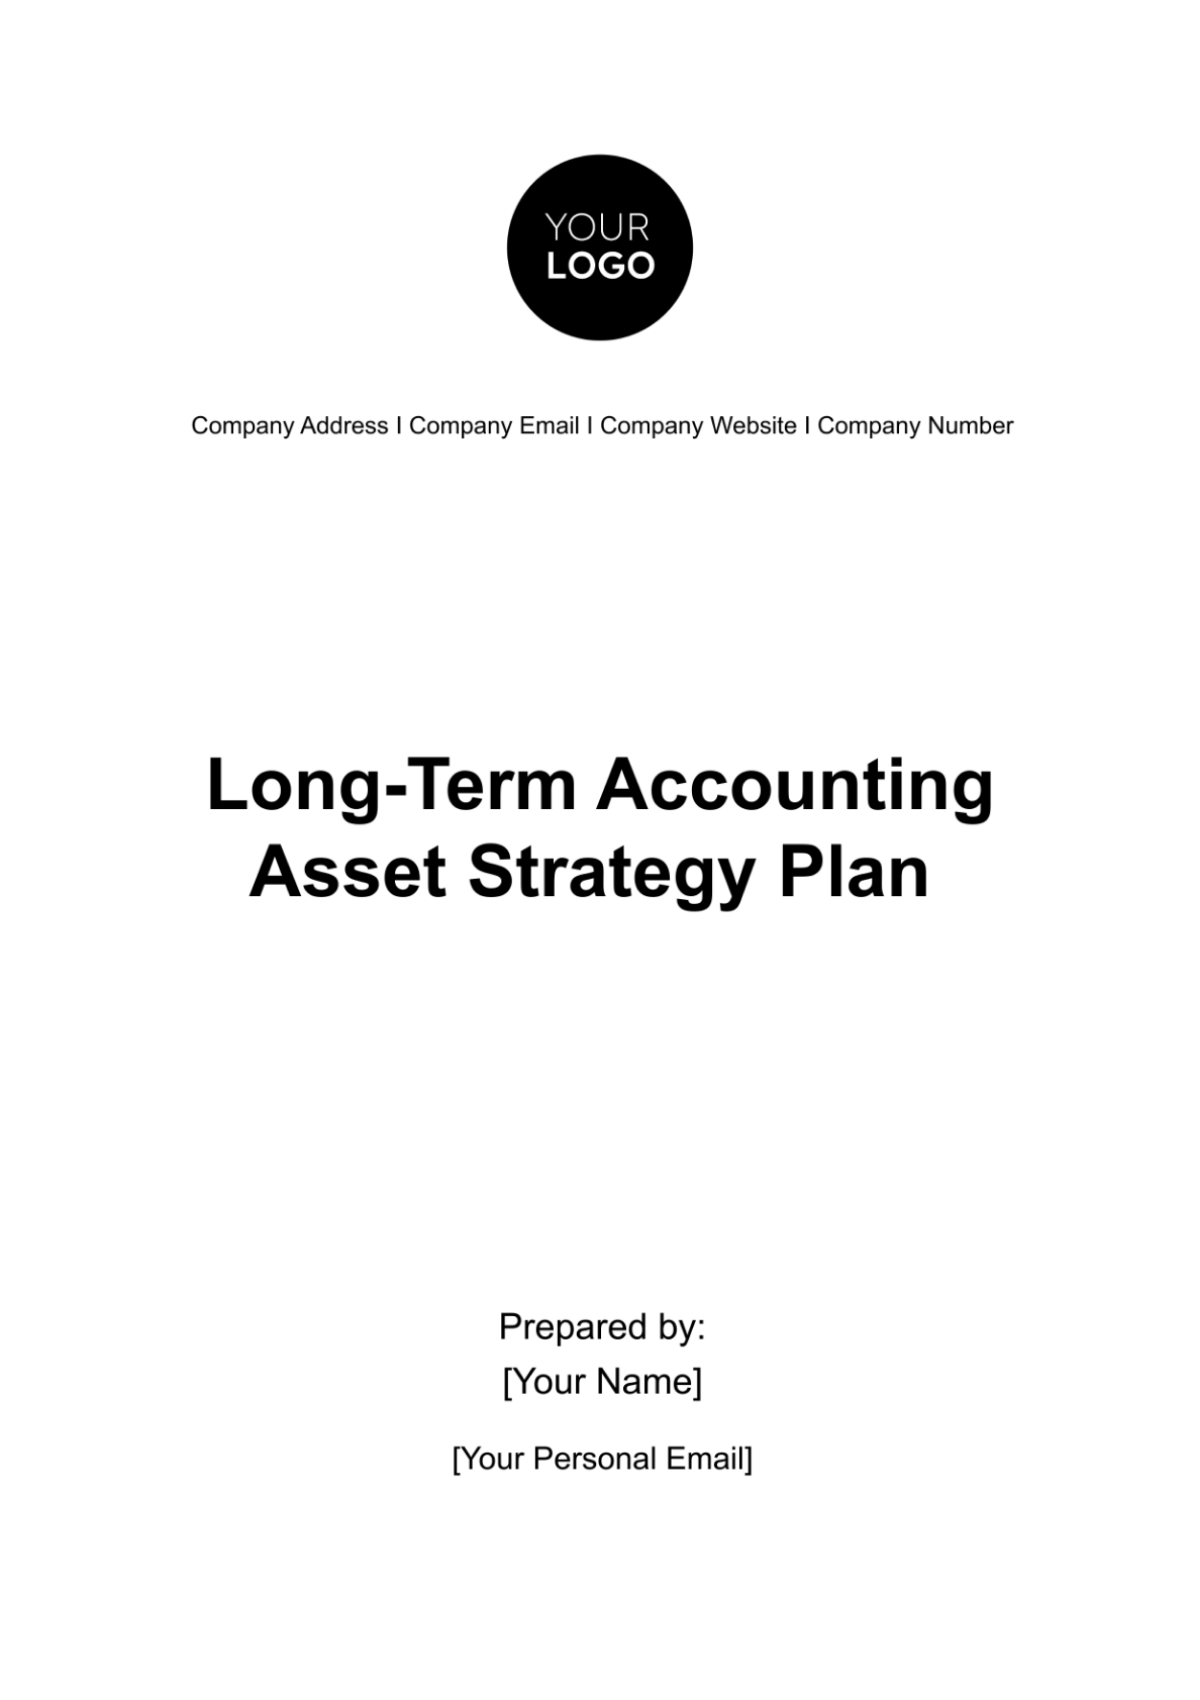 Long-Term Accounting Asset Strategy Plan Template